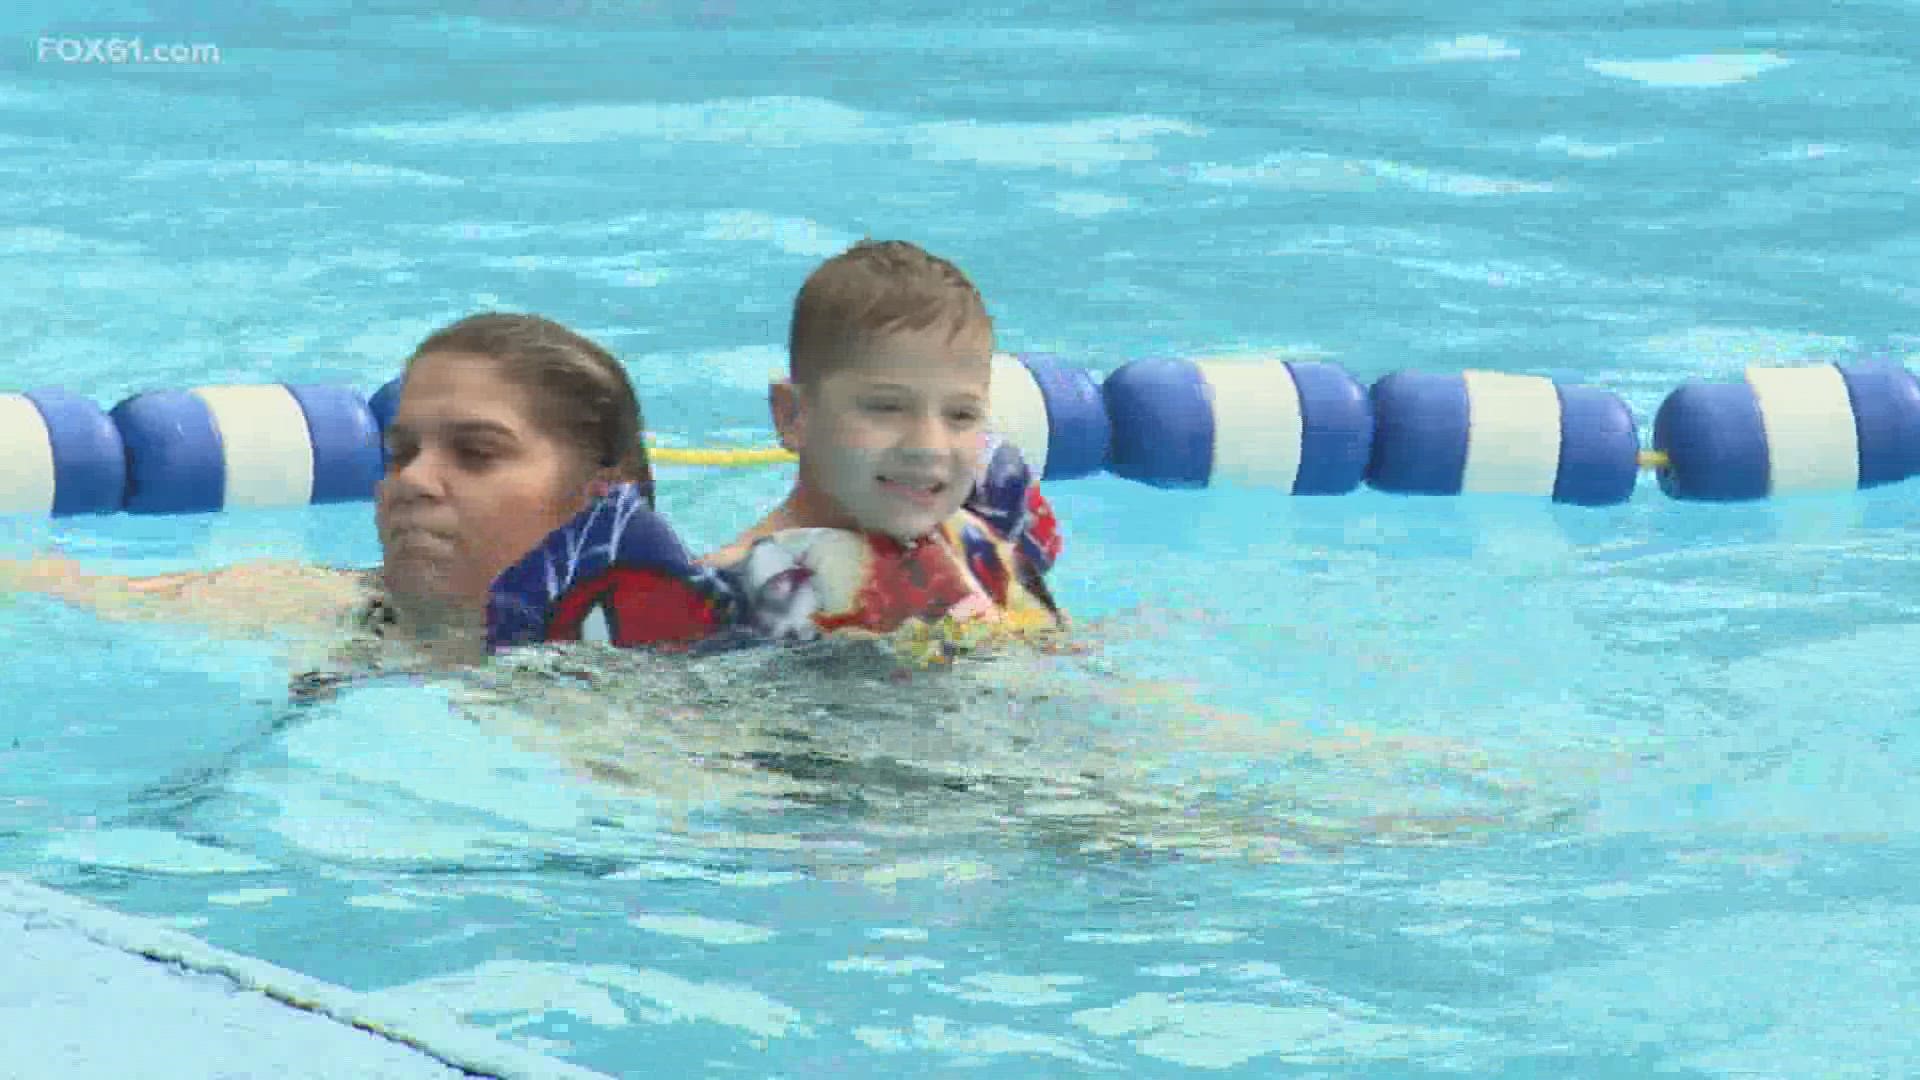 "It’s like uncomfortably hot," one Waterbury parent said. "I love that they have a city pool that’s free for the kids."